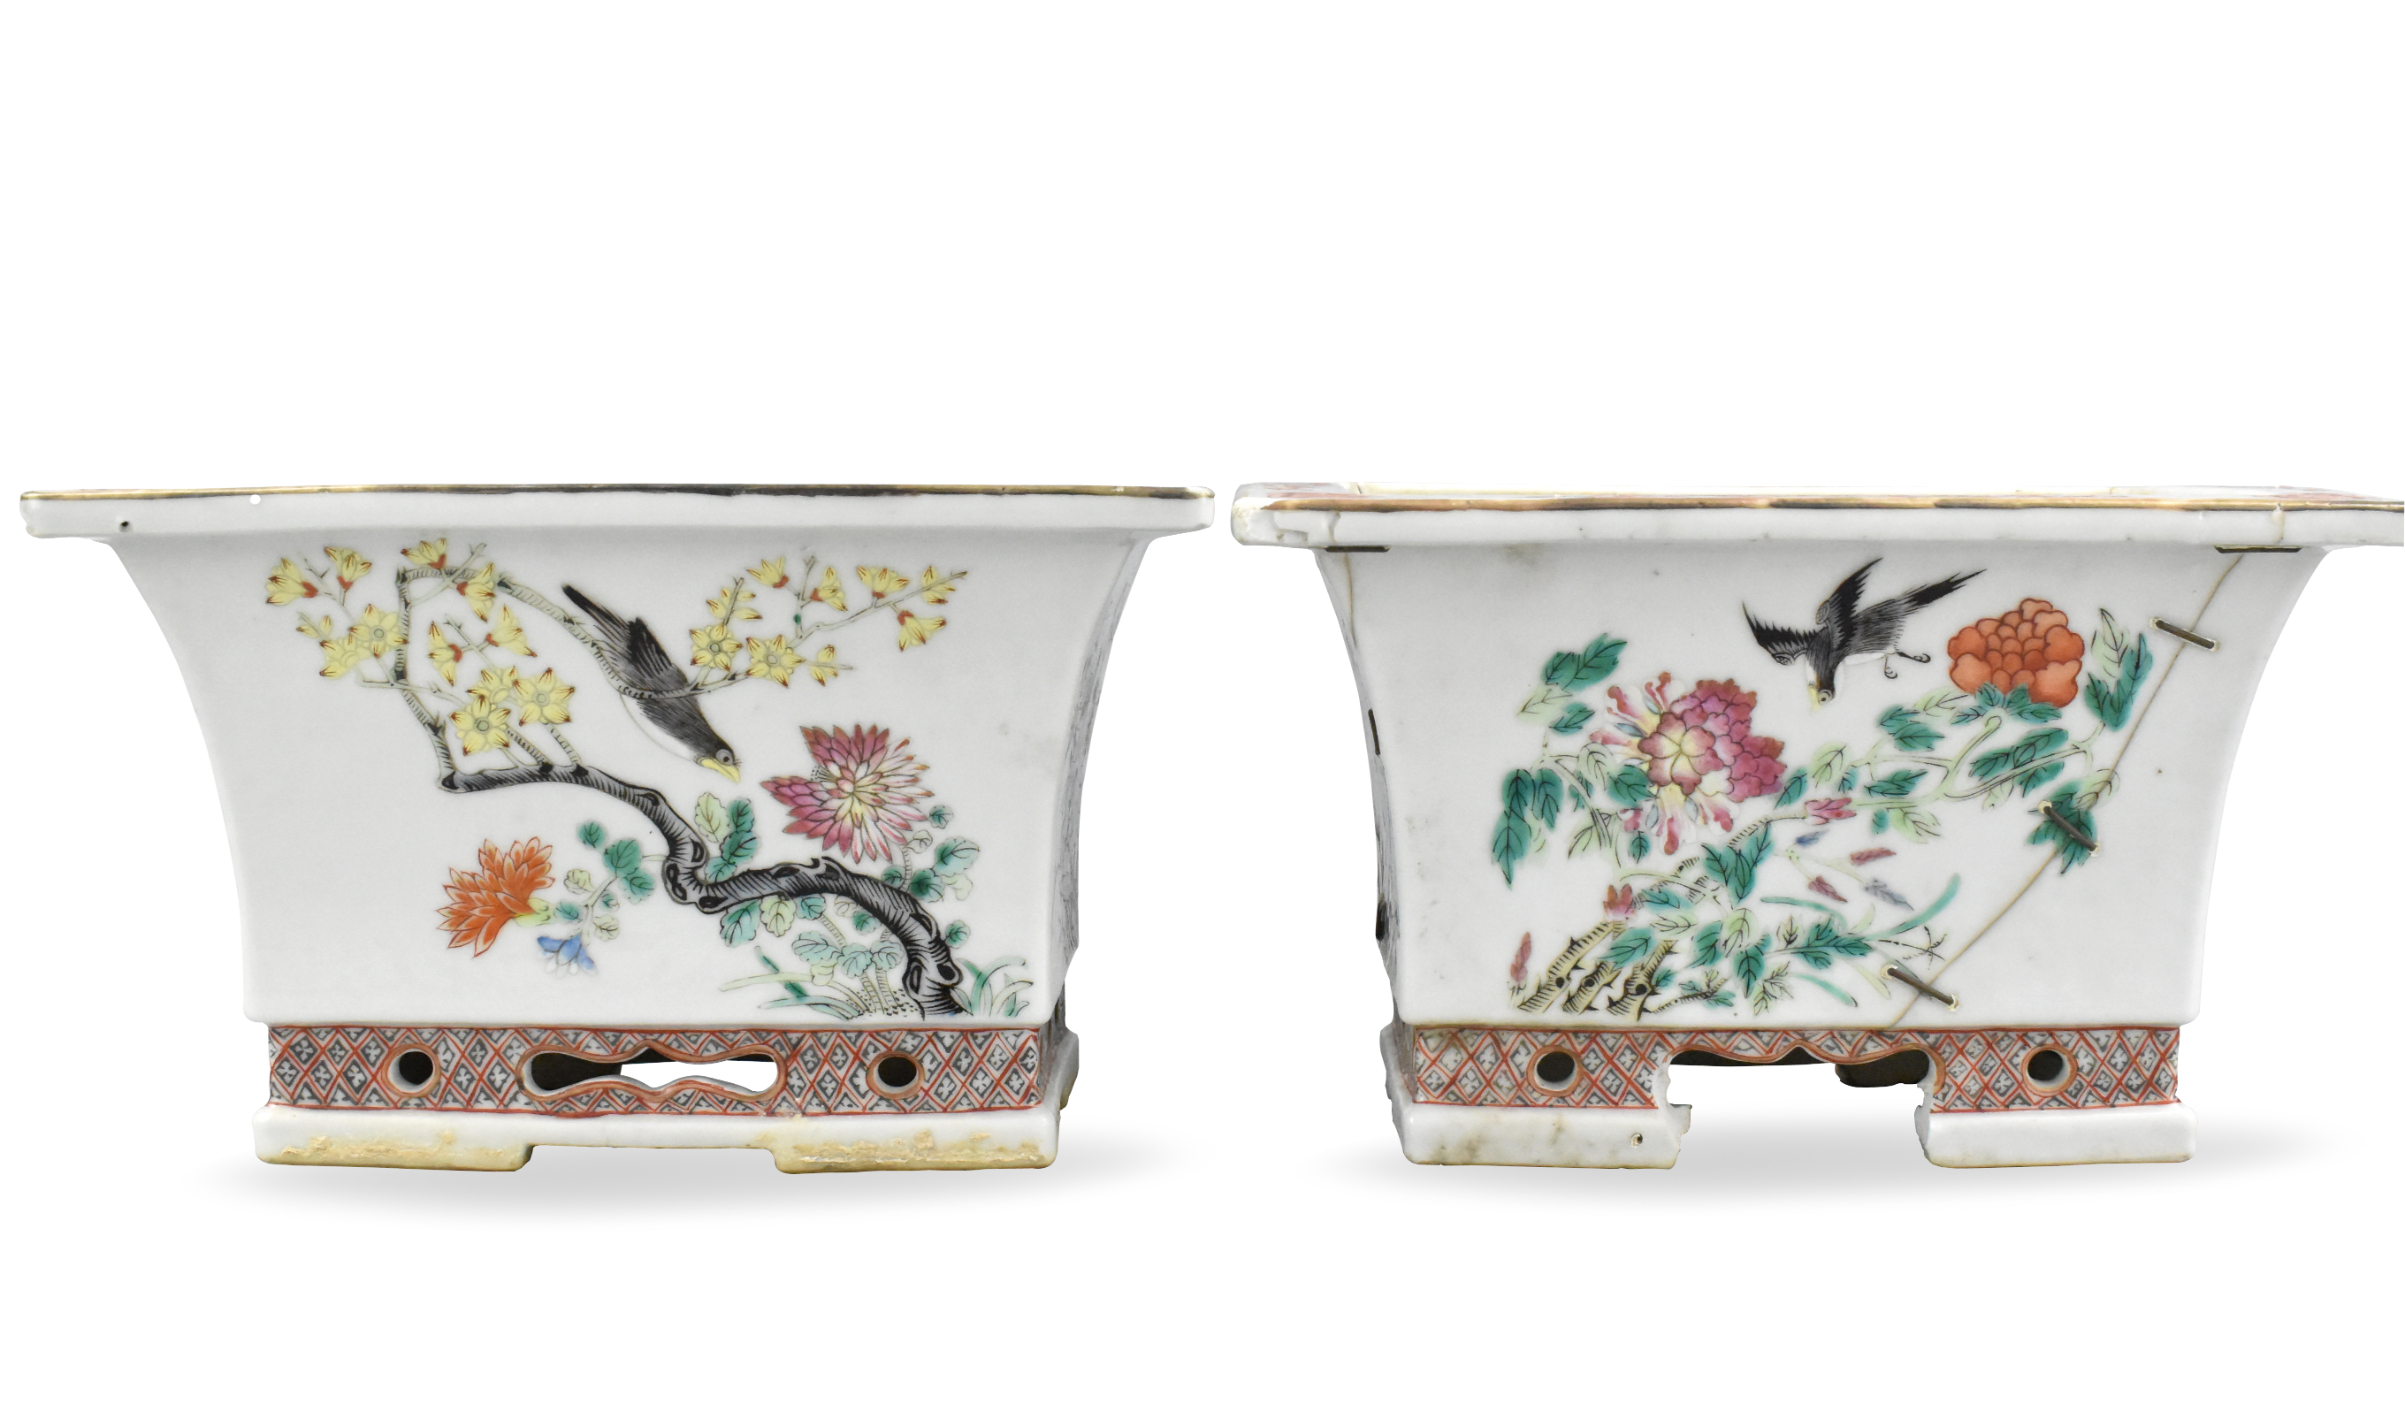 PAIR OF CHINESE FAMILLE ROSE JARDINIERES,19TH